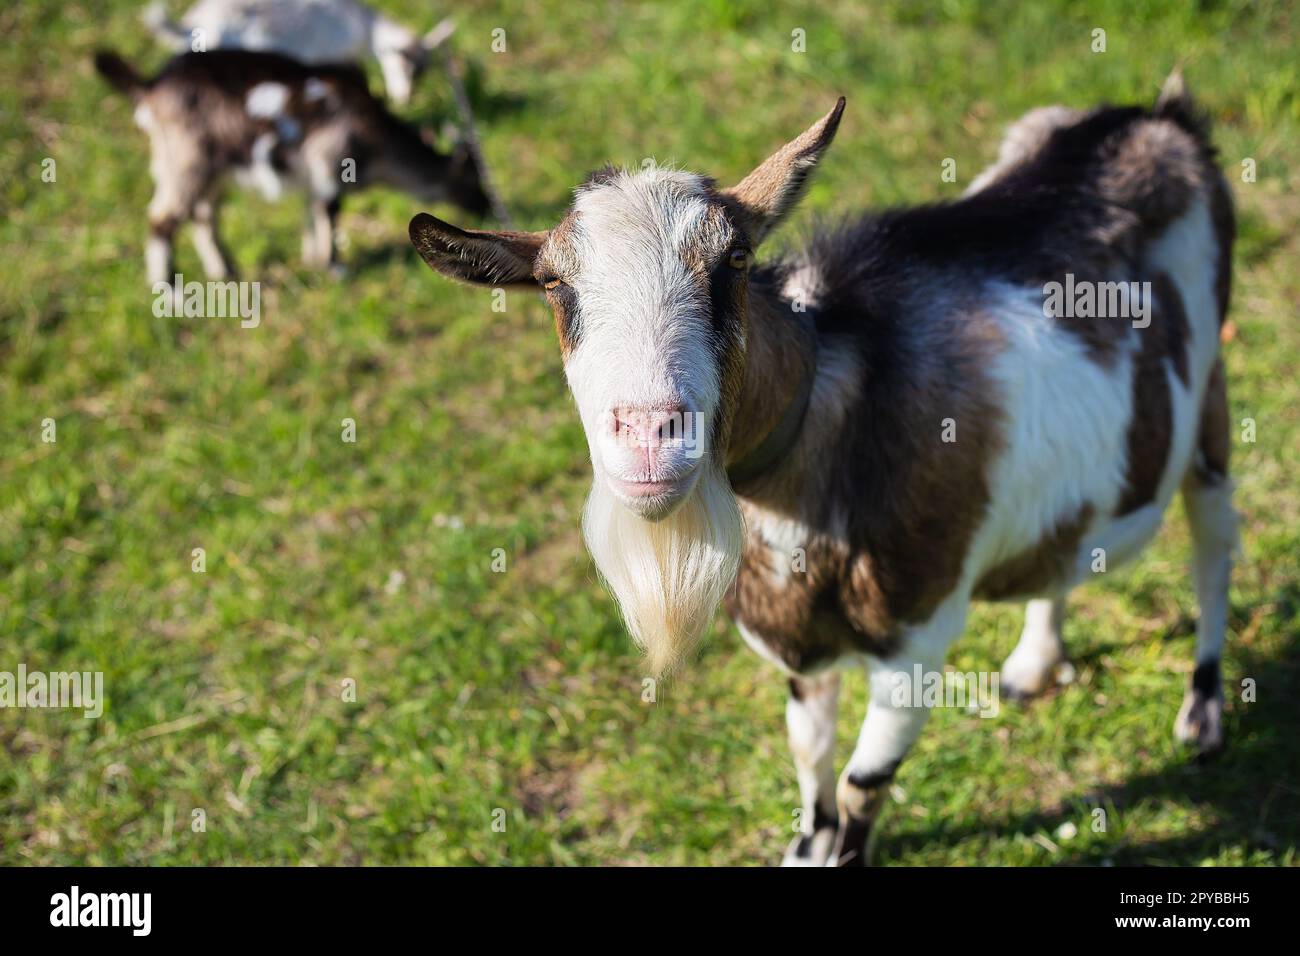 Funny goats standing among the green field, animal grazing. Rural economy. Mom and child. Looking into the camera. Stock Photo